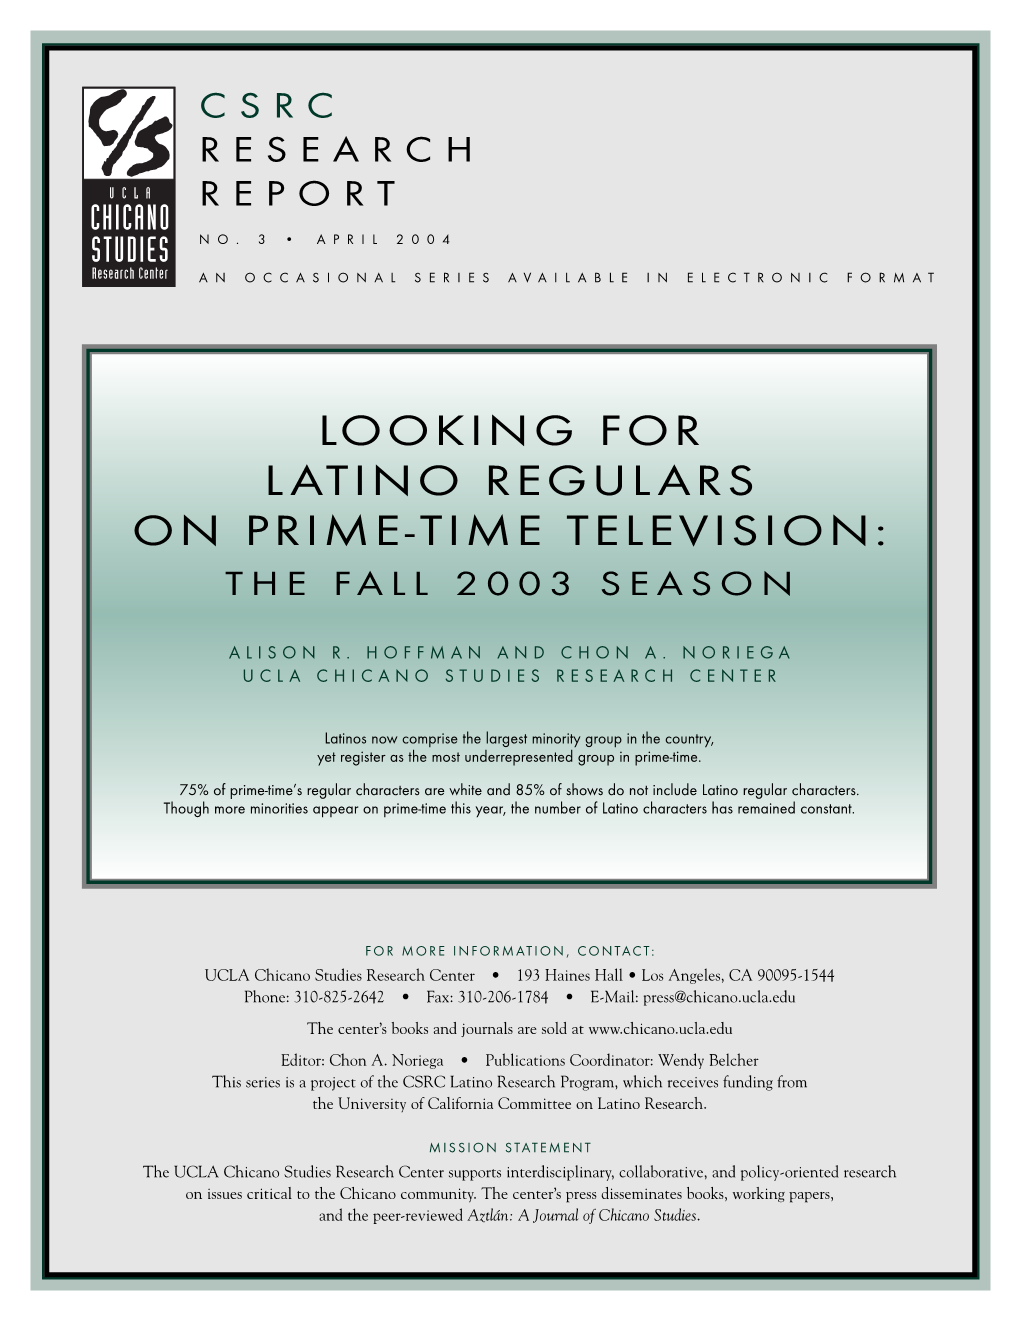 Looking for Latino Regulars on Prime-Time Television: the Fall 2003 Season